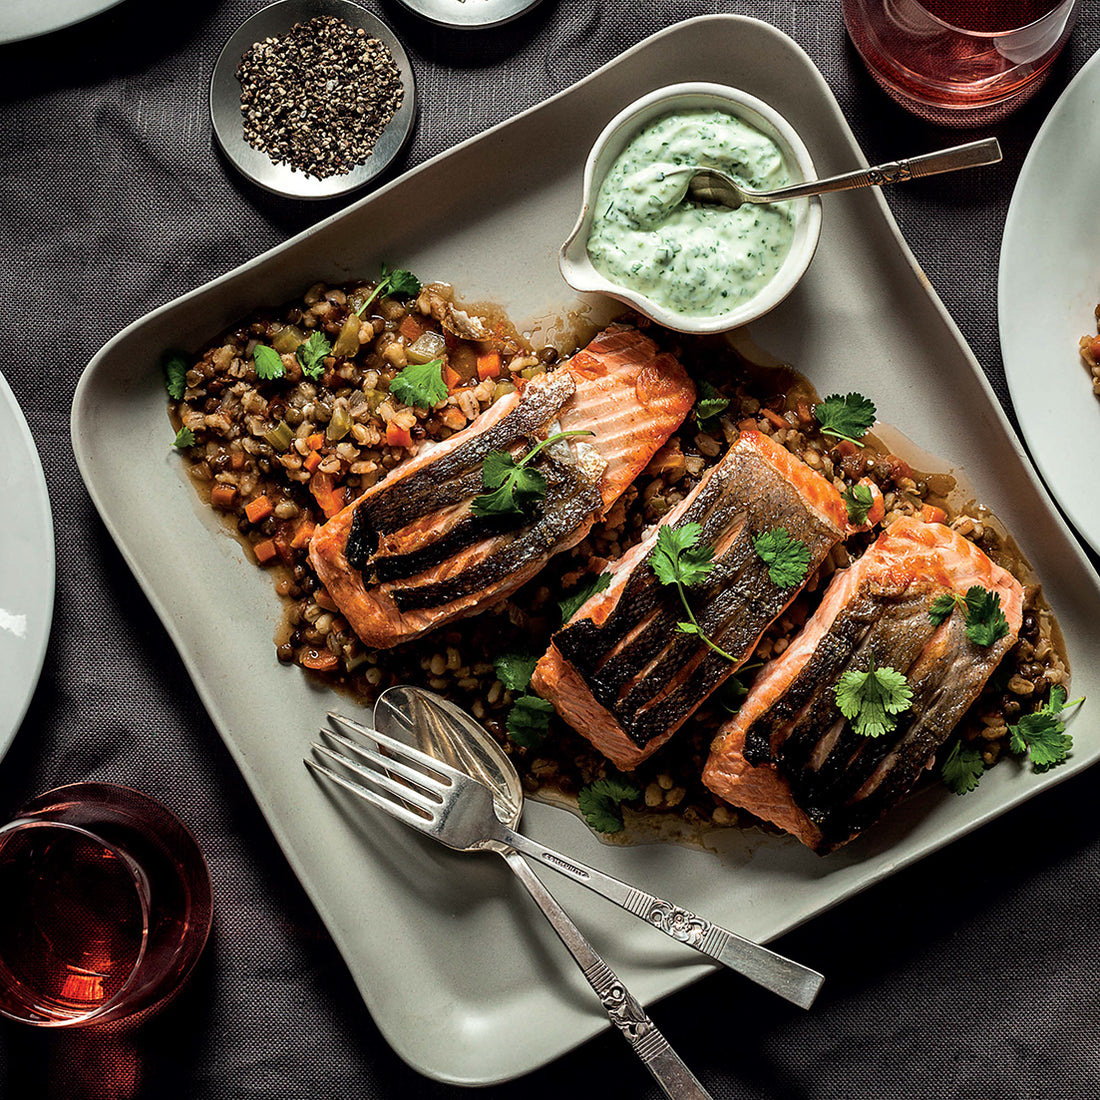 Salmon on a Duet of Barley & Lentils